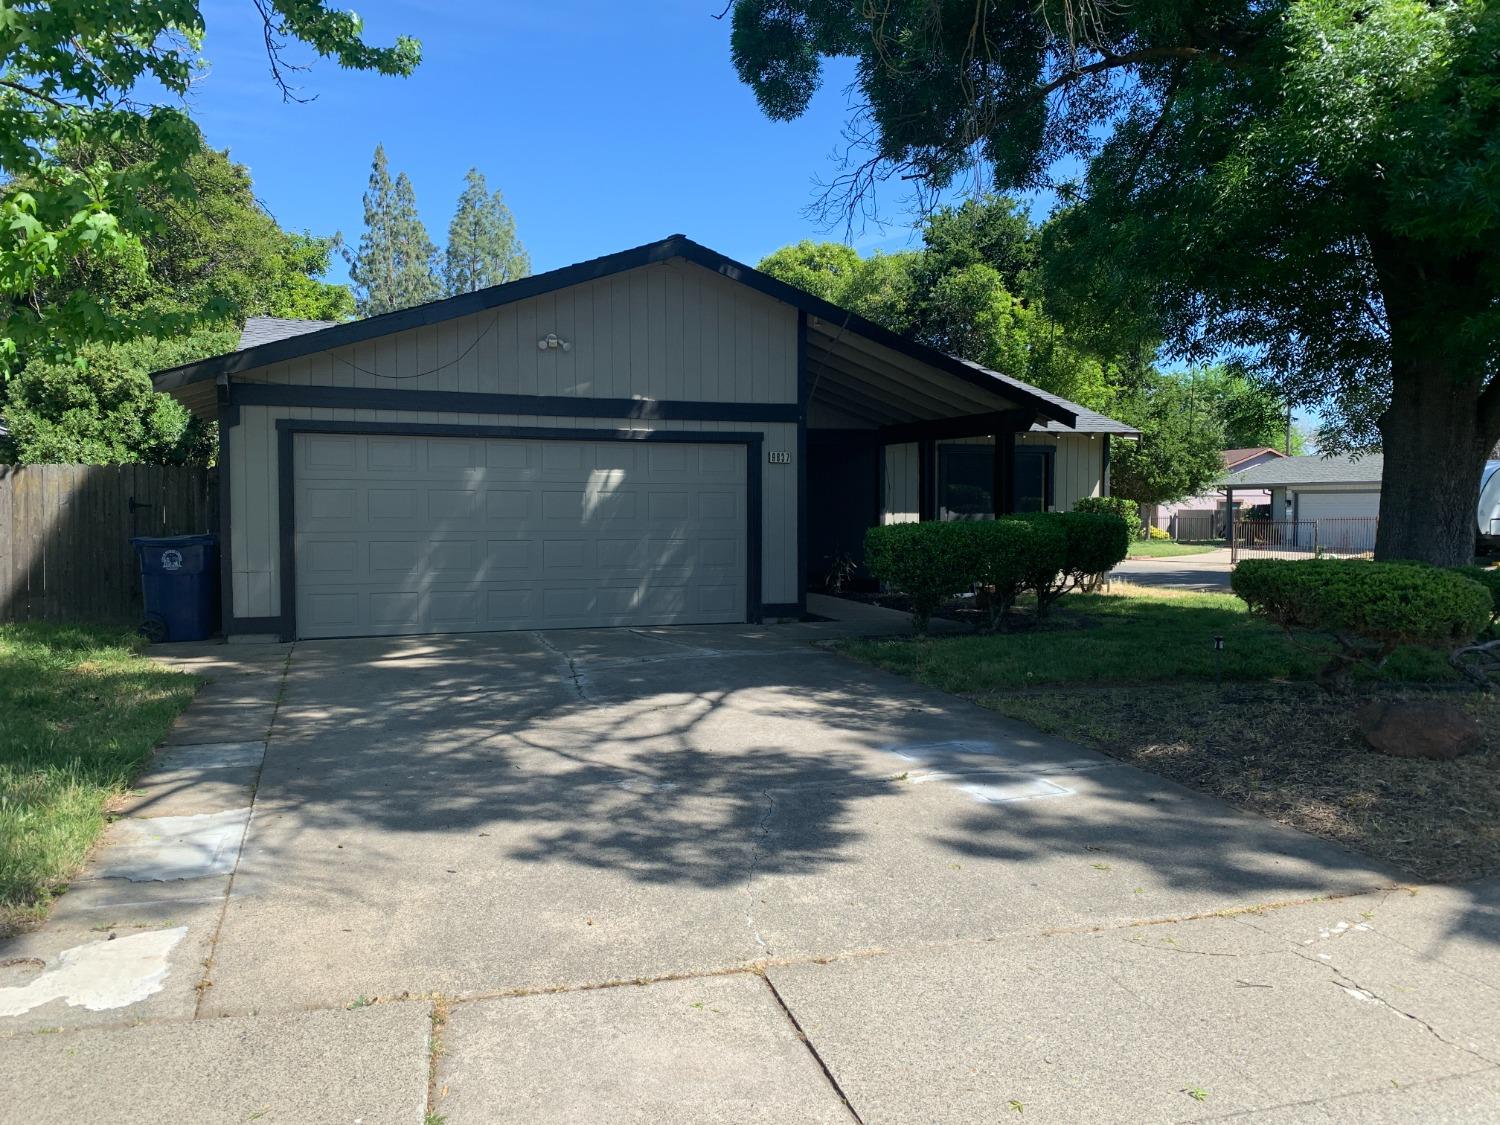 3 bedroom, 2 bath, 2 car garage. Newer roof. This property is a cosmetic fixer. Seller prefers AS-IS